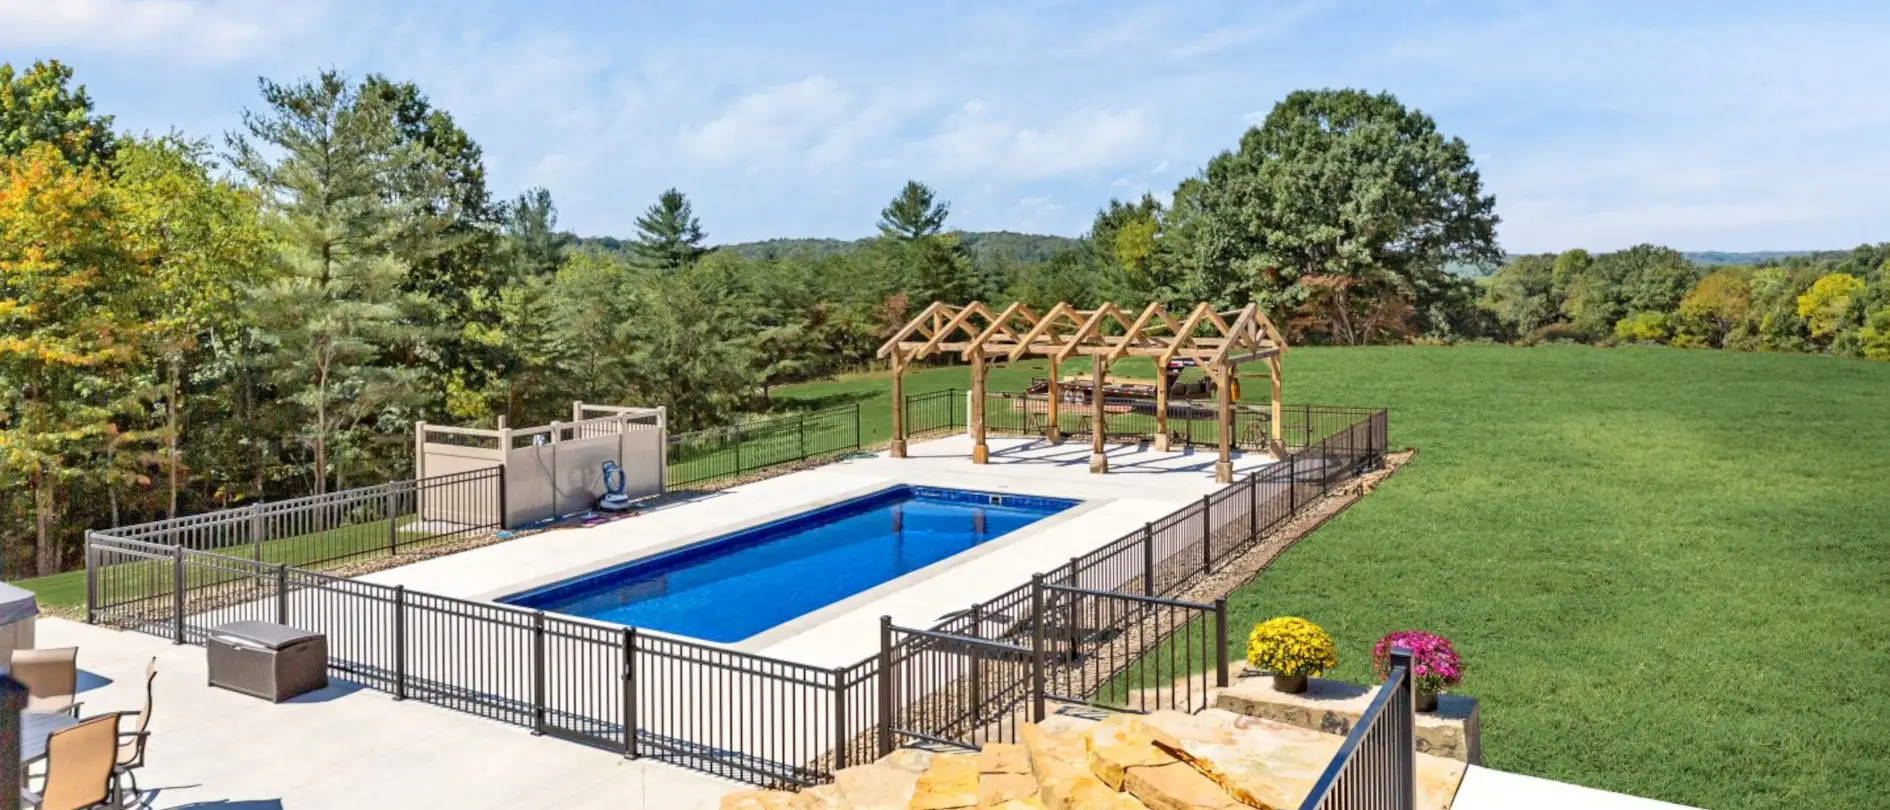 Heavenly View Farmhouse Outdoor Pool